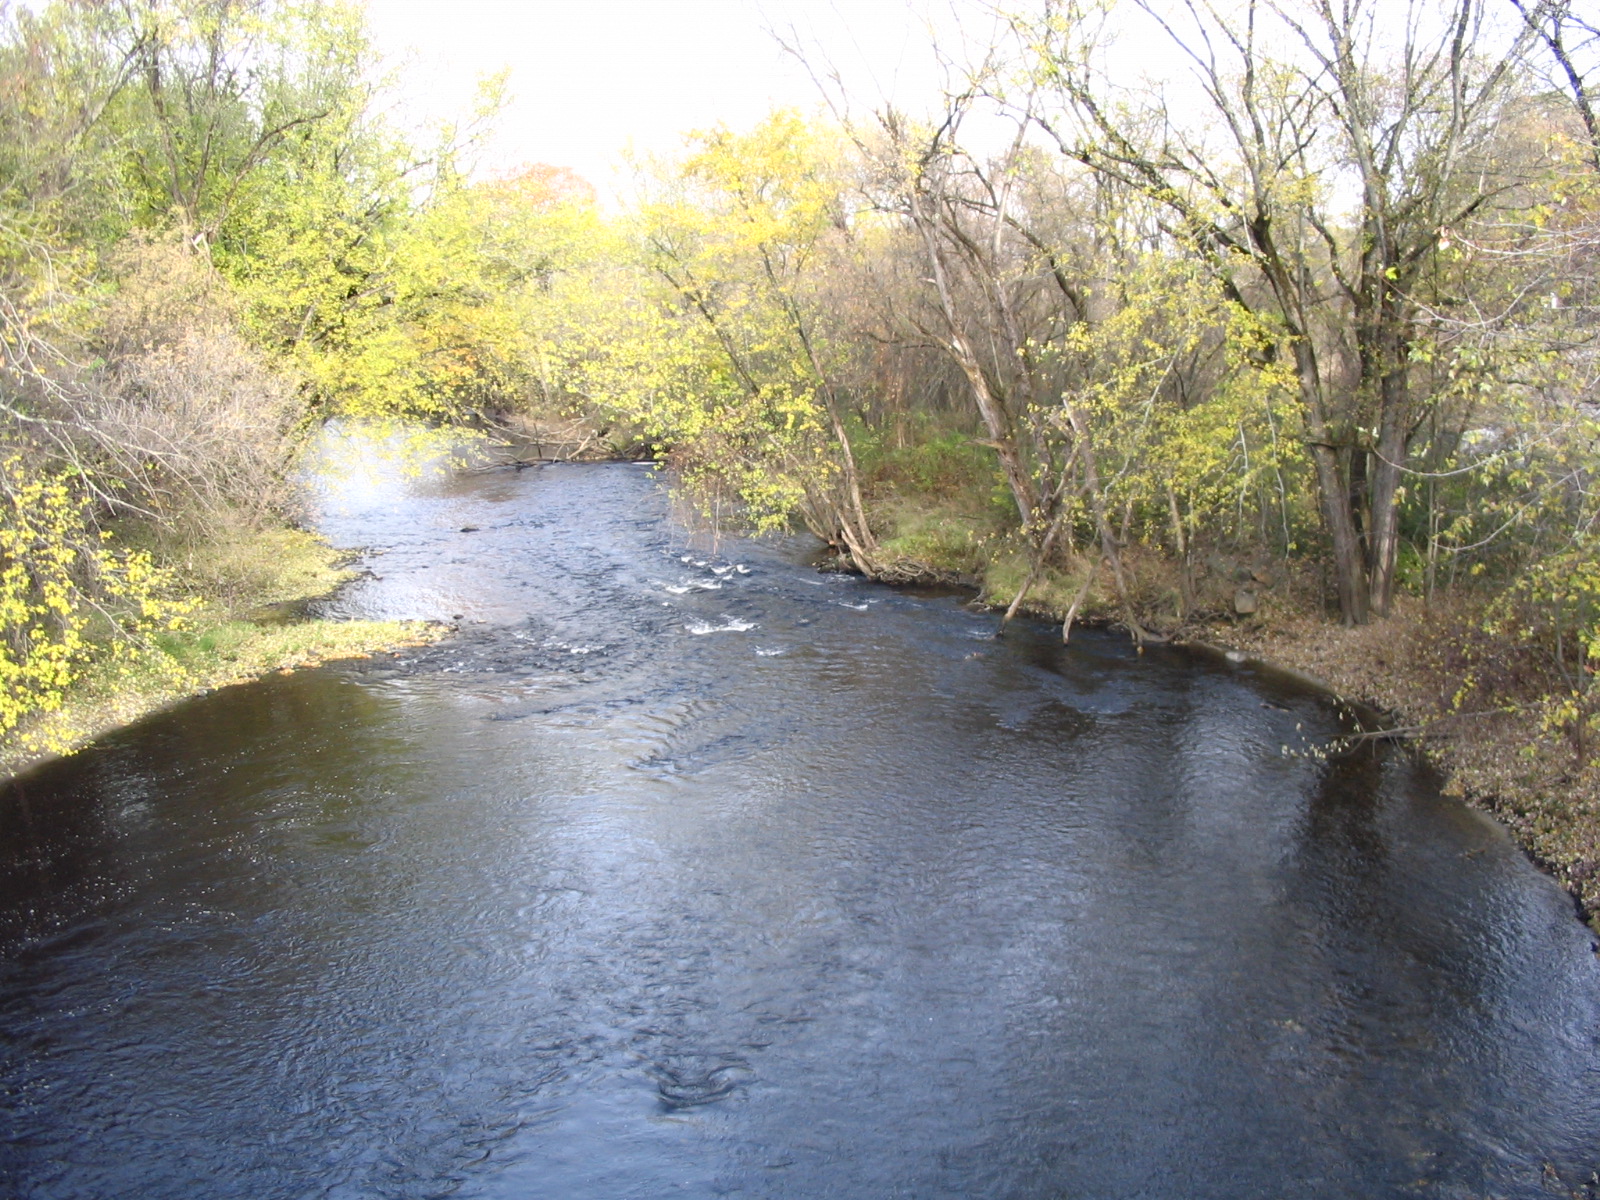 Photograph of the Otter Creek at Center Rutland, VT (CENV1) looking downstream